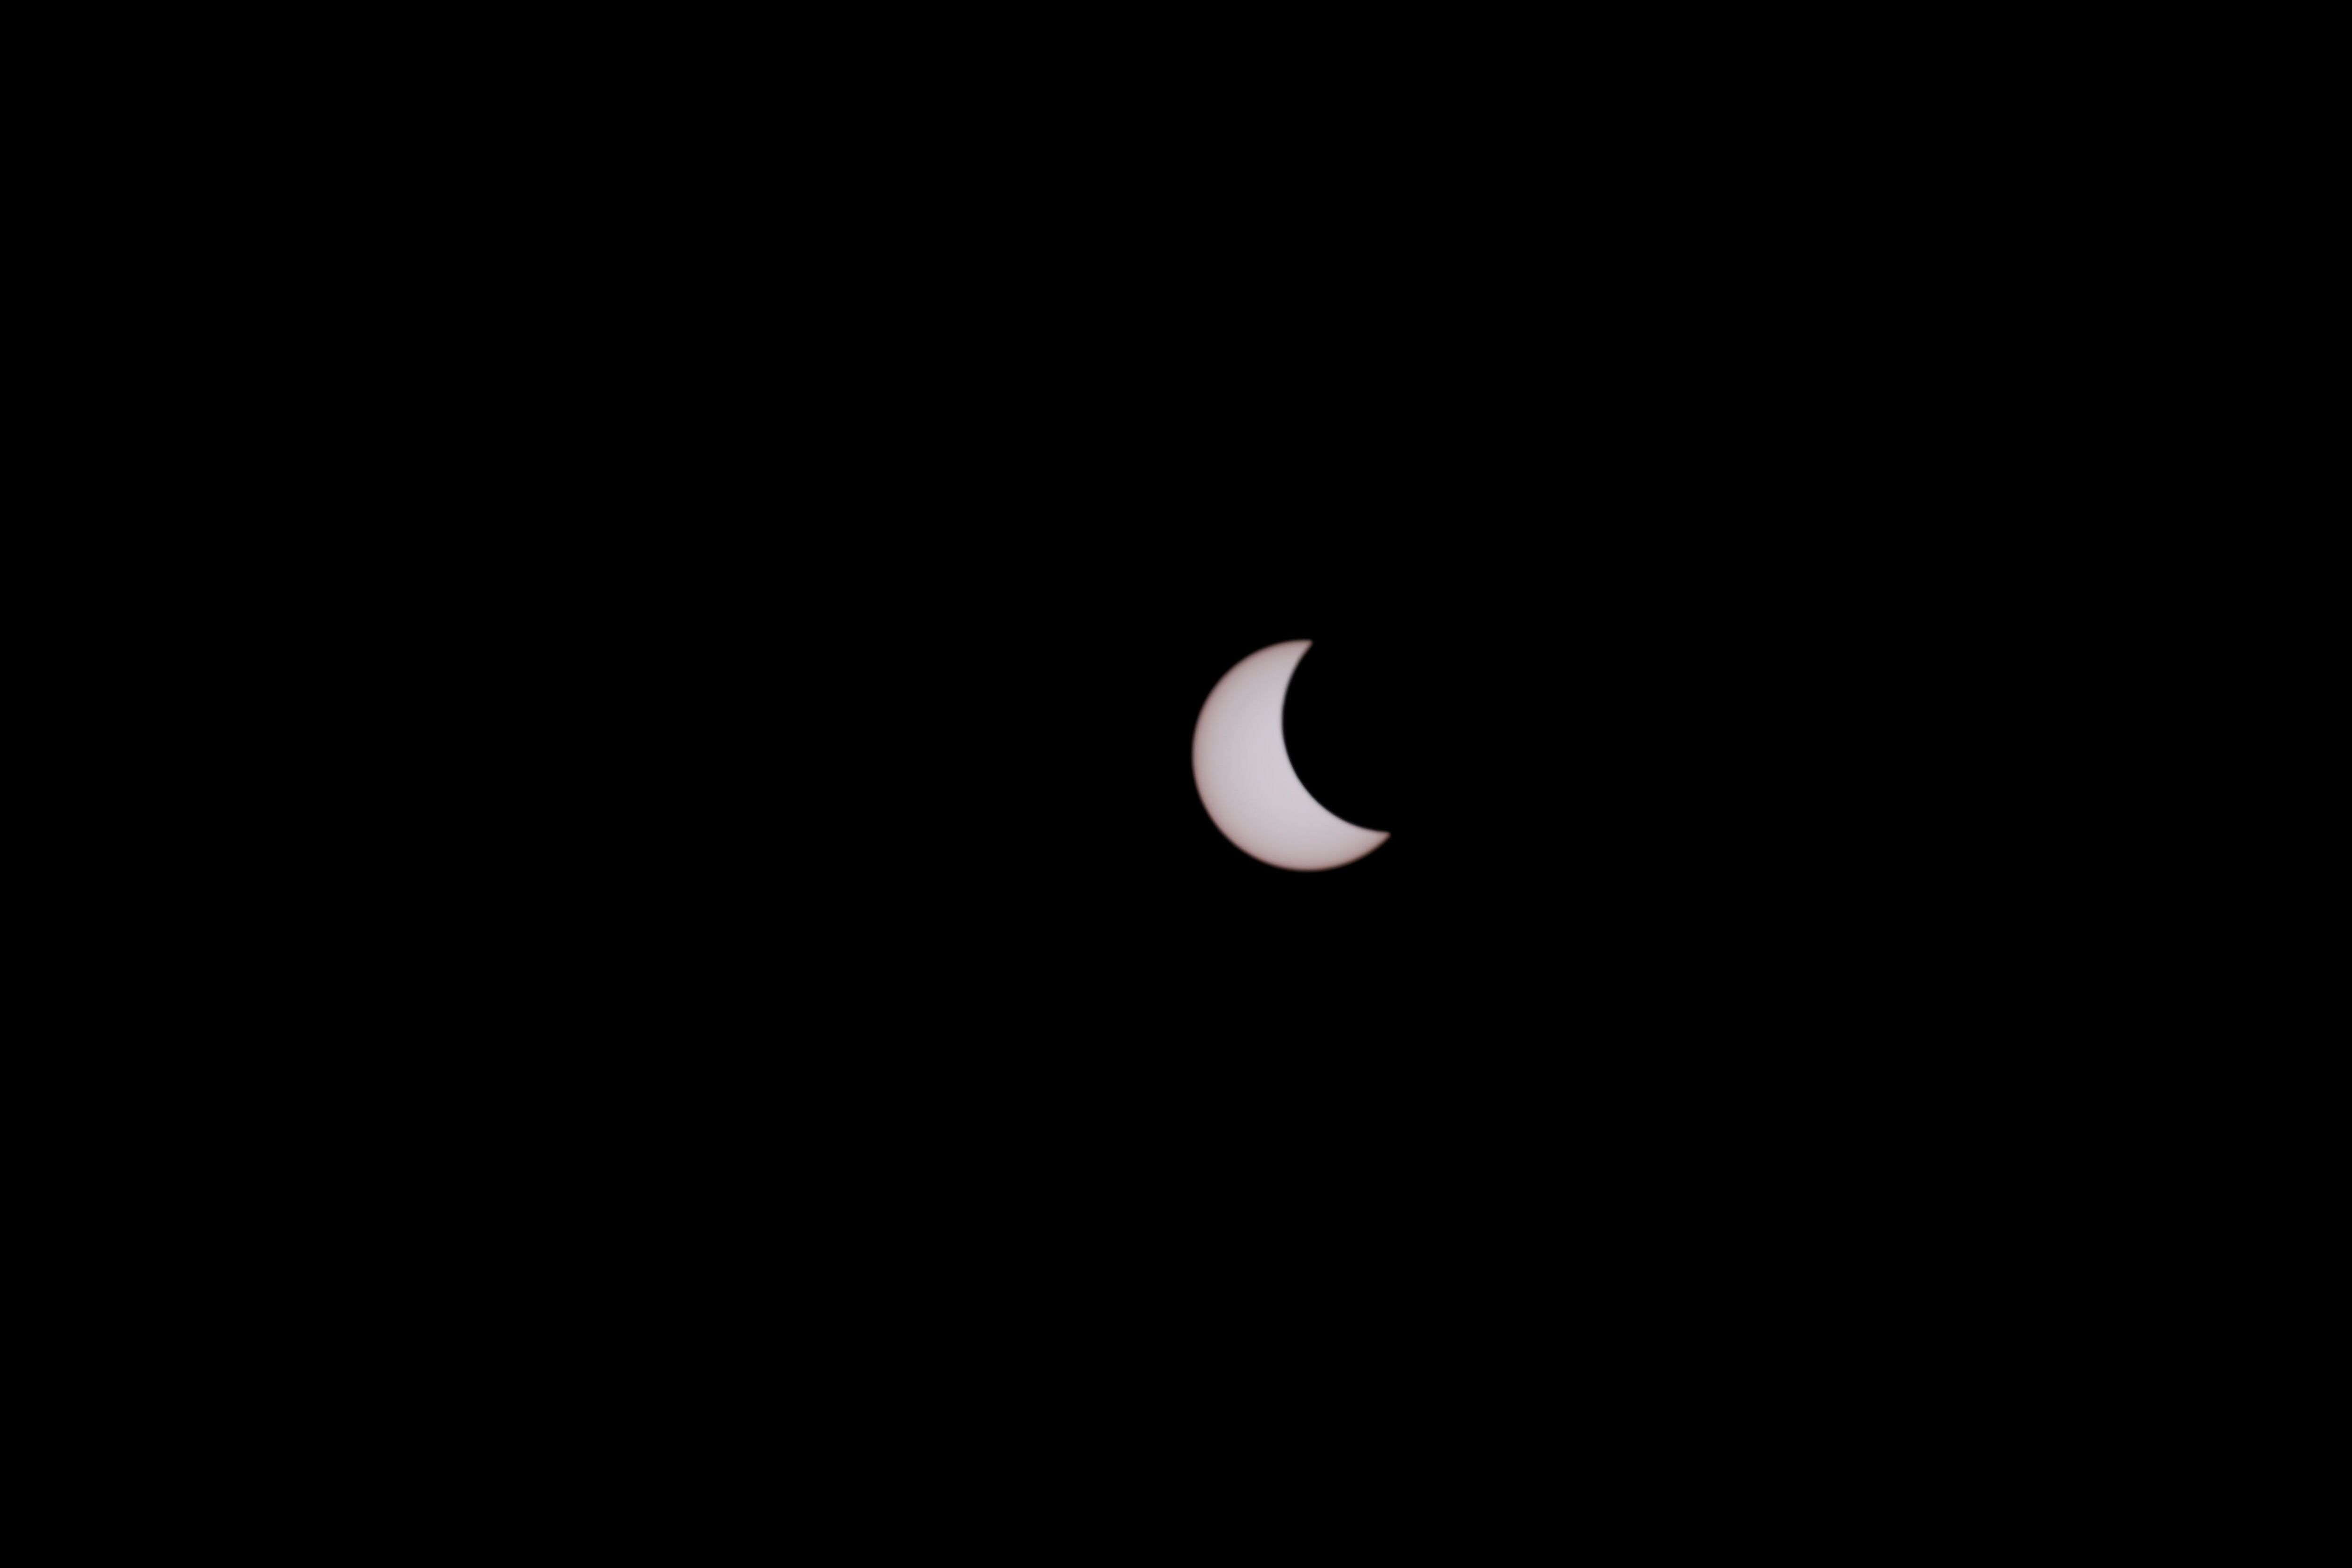 A photo shows a partial solar eclipse observed in Manama, Bahrain, June 21, 2020. REUTERS/Hamad I Mohammed